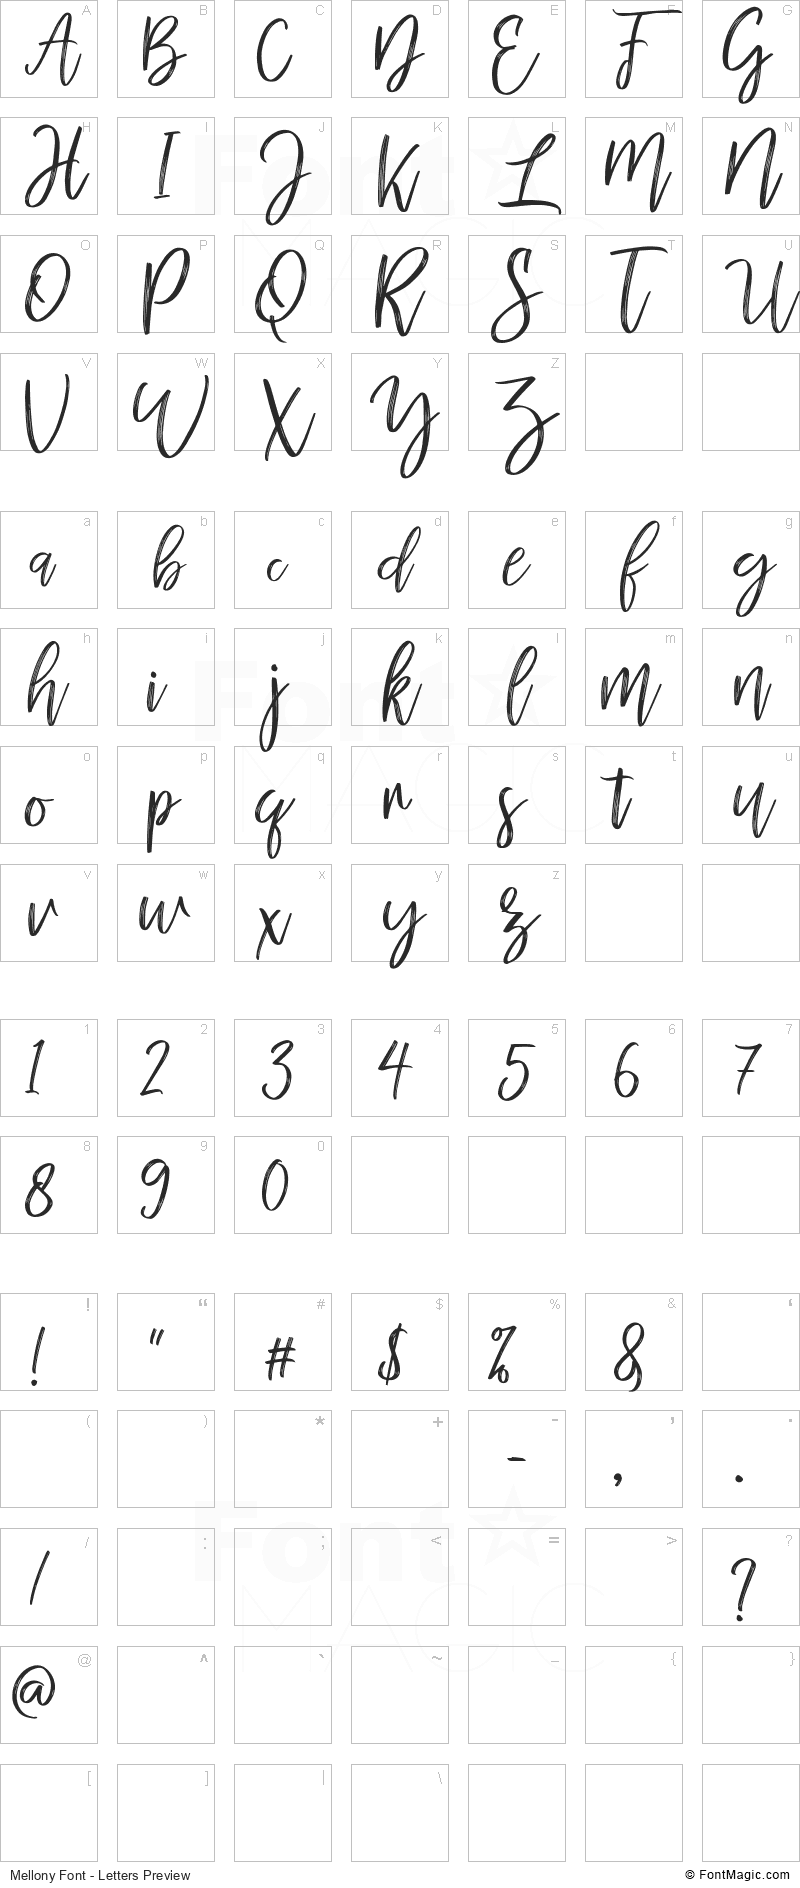 Mellony Font - All Latters Preview Chart